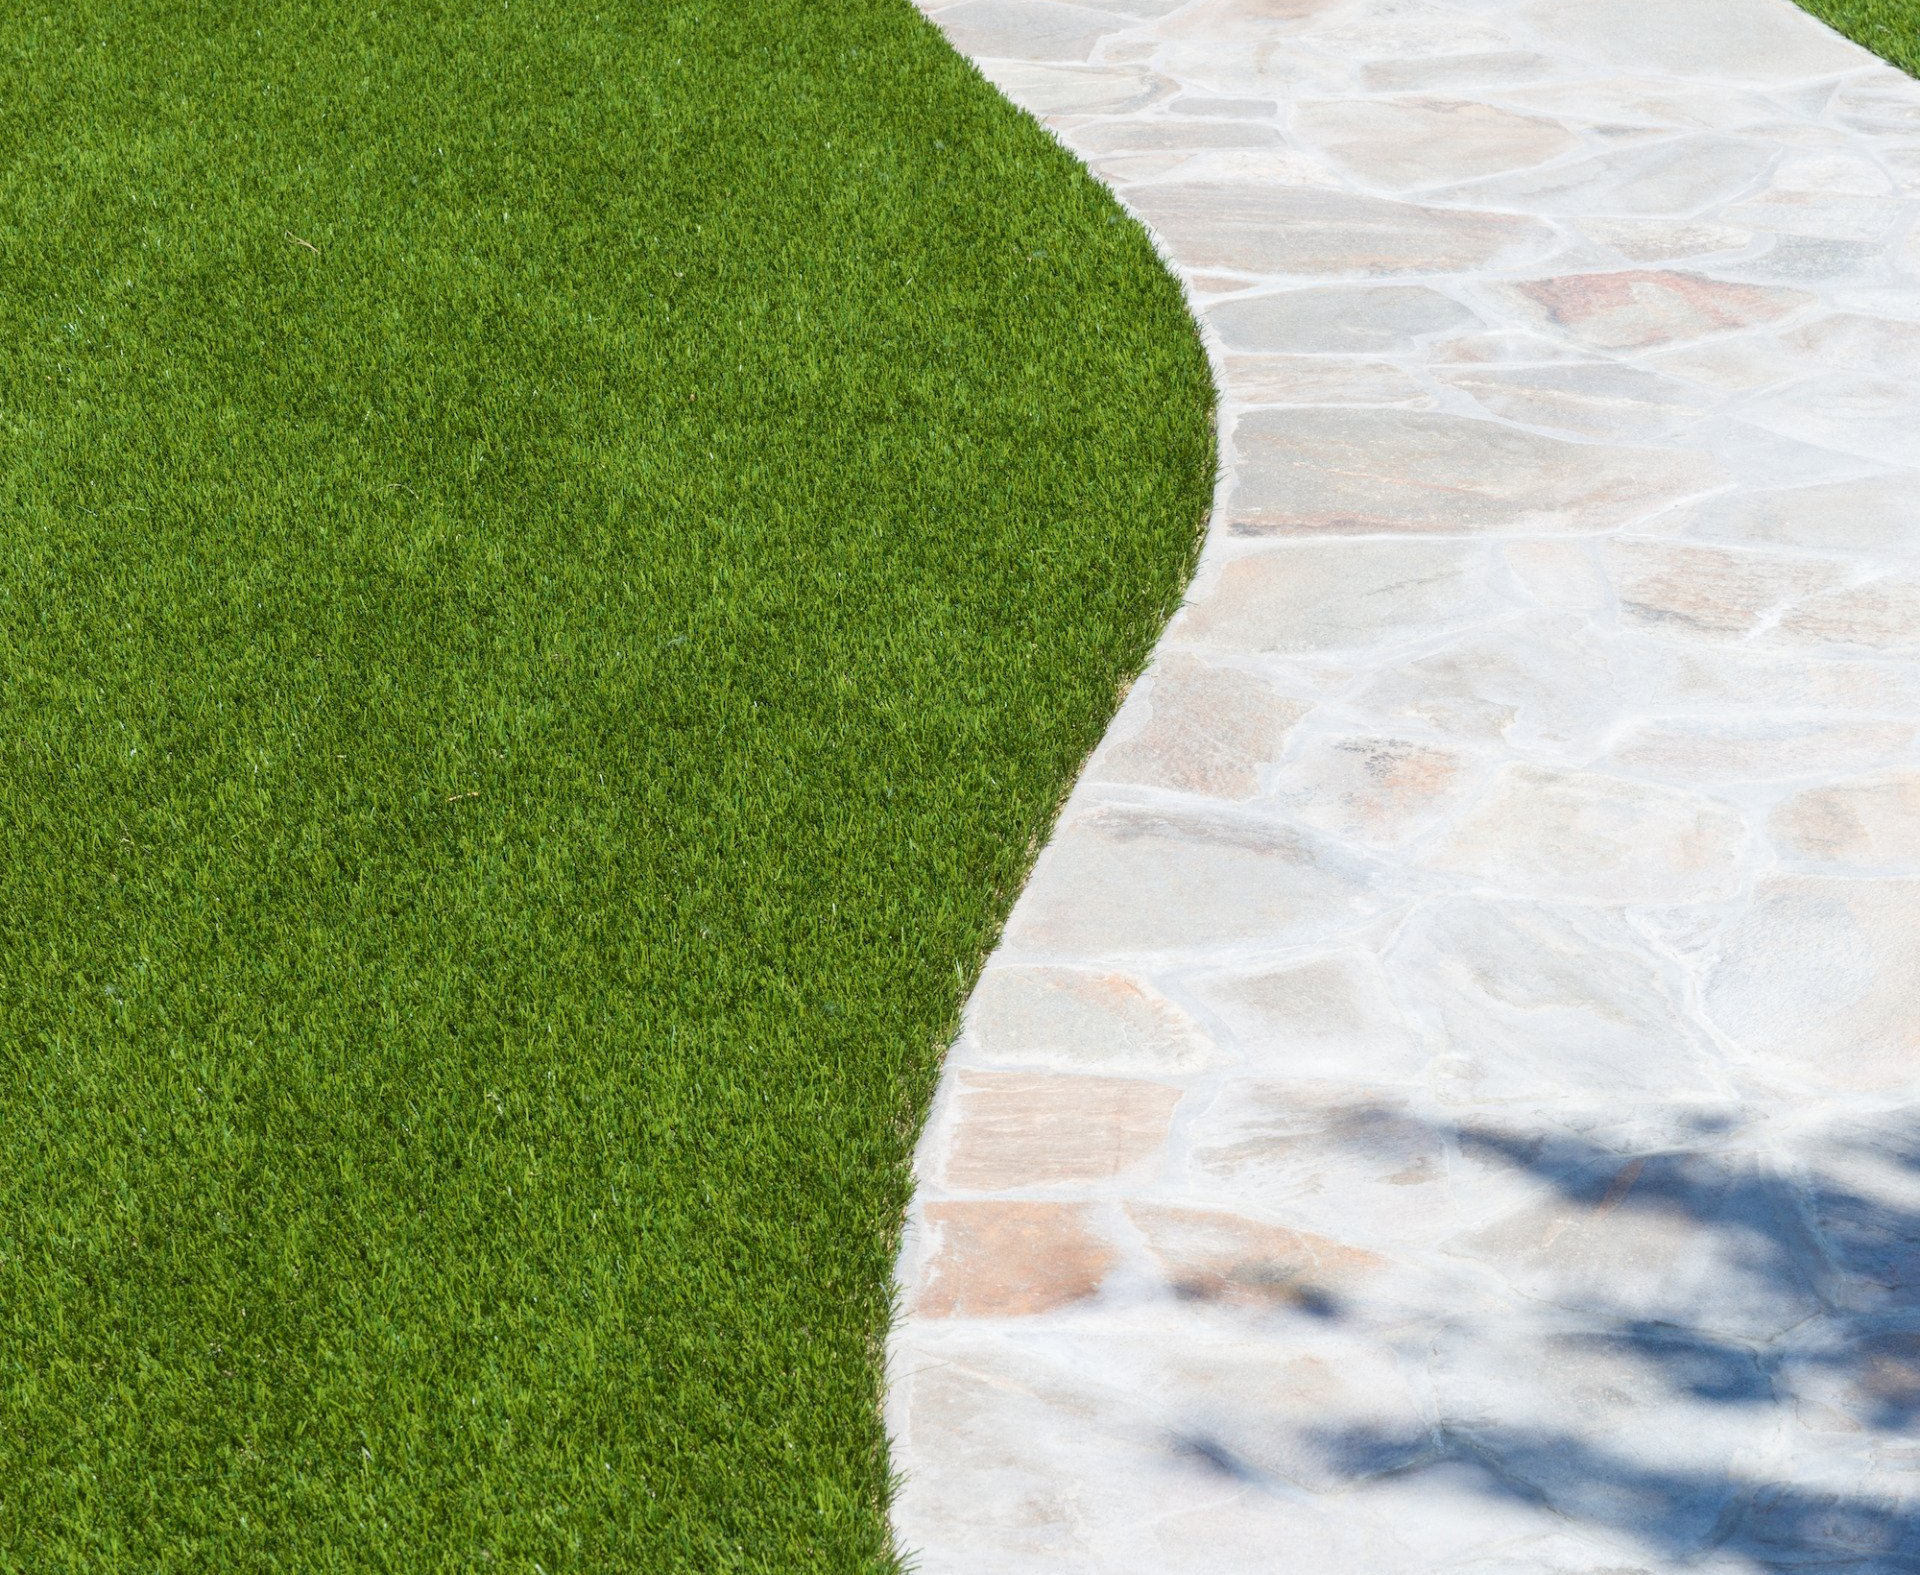 path paving stones surrounded by artificial grass in a property in Tucson AZ